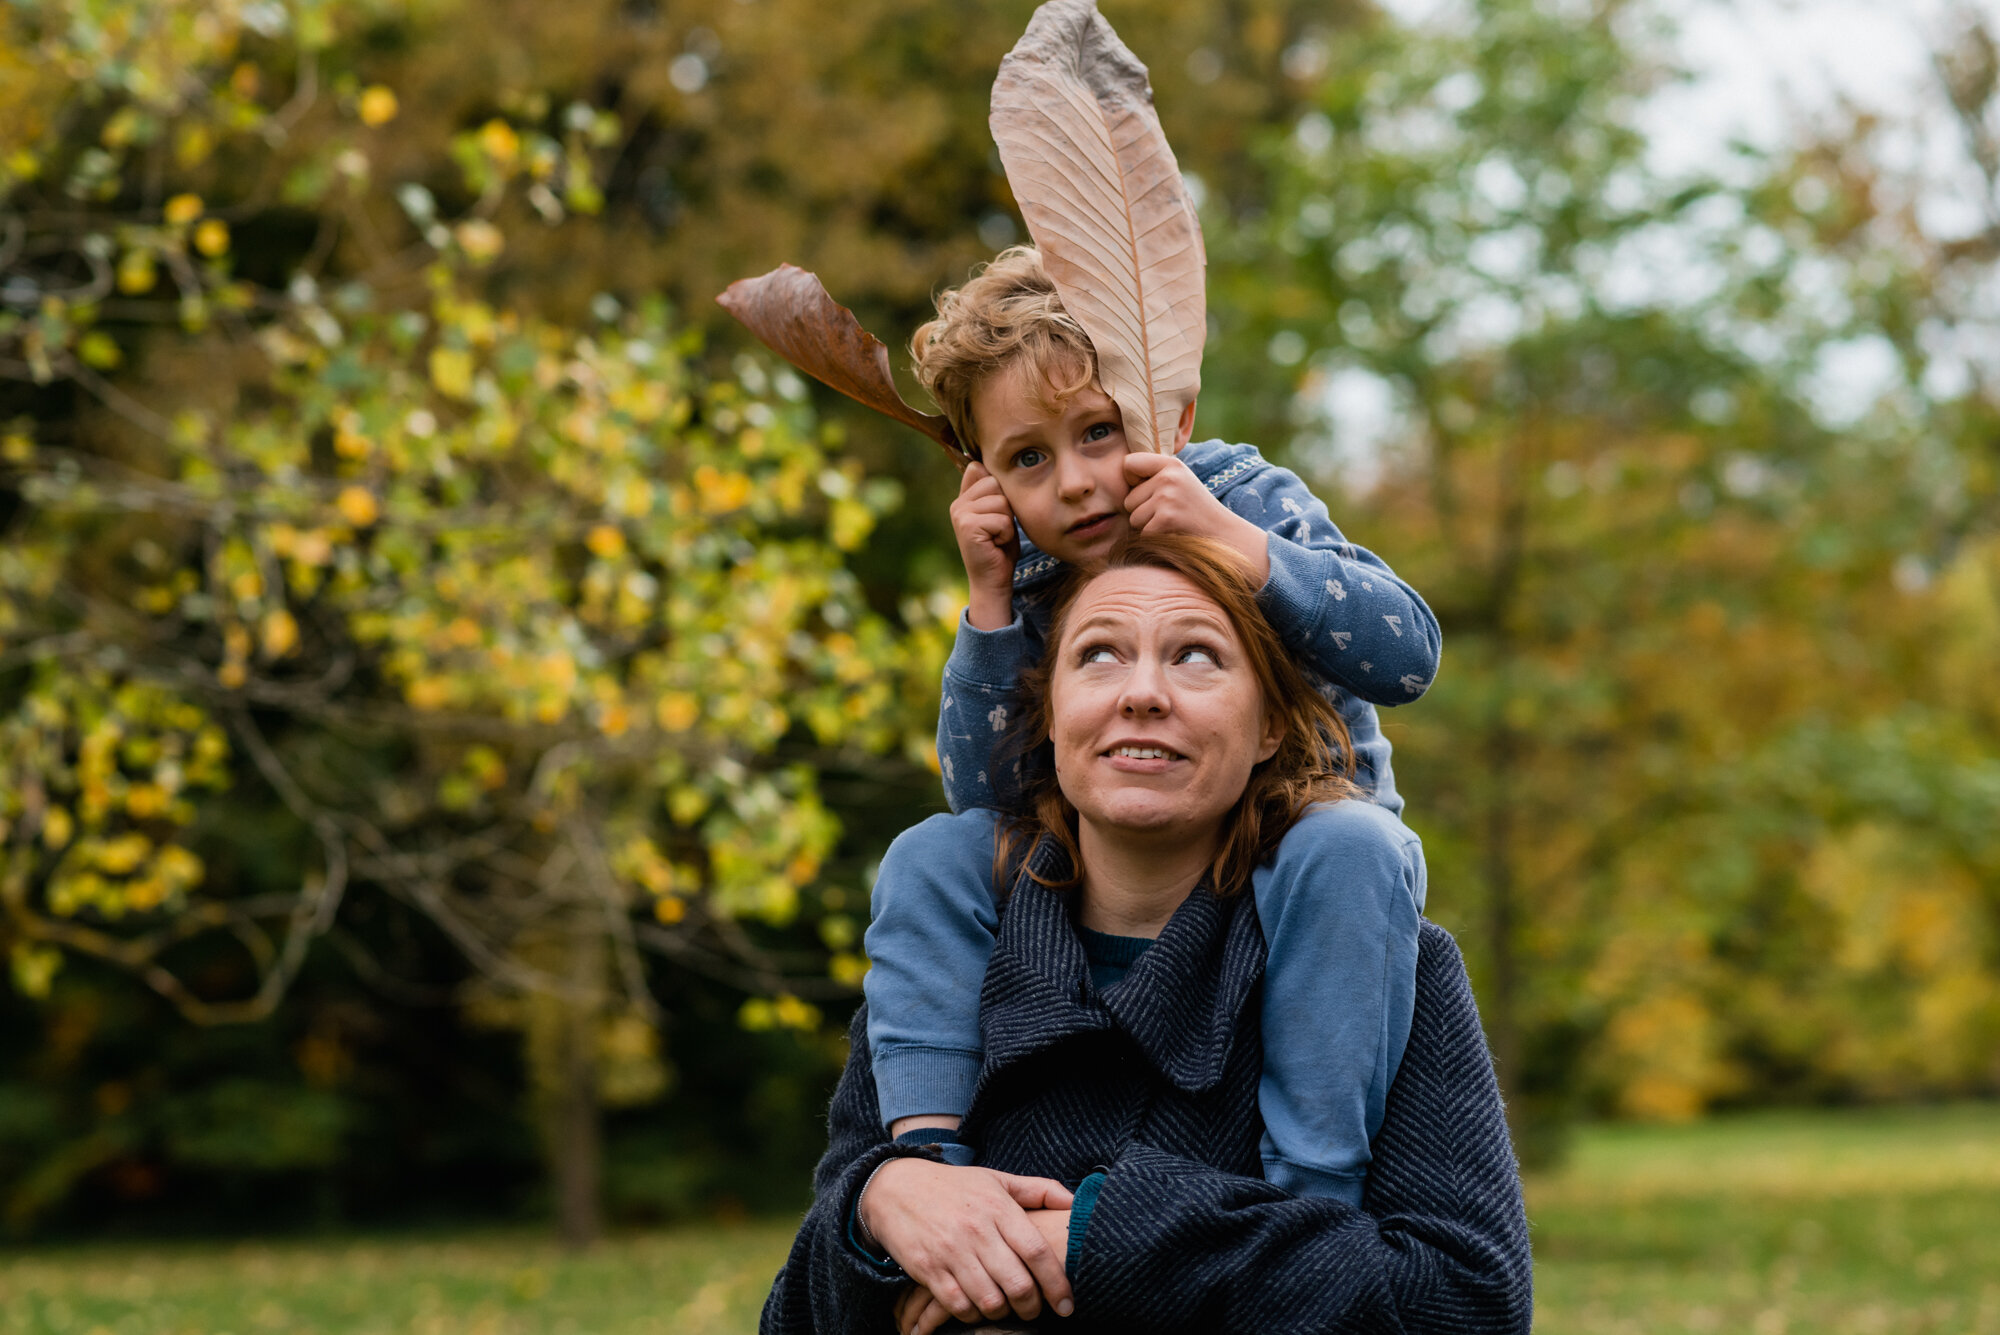  A boy in a blue top and trousers is seen putting two big oval shaped leaves by his ears, as he sits on his mother's shoulders and she is looking up at him, in Kew Botanical Gardens, Surrey. 